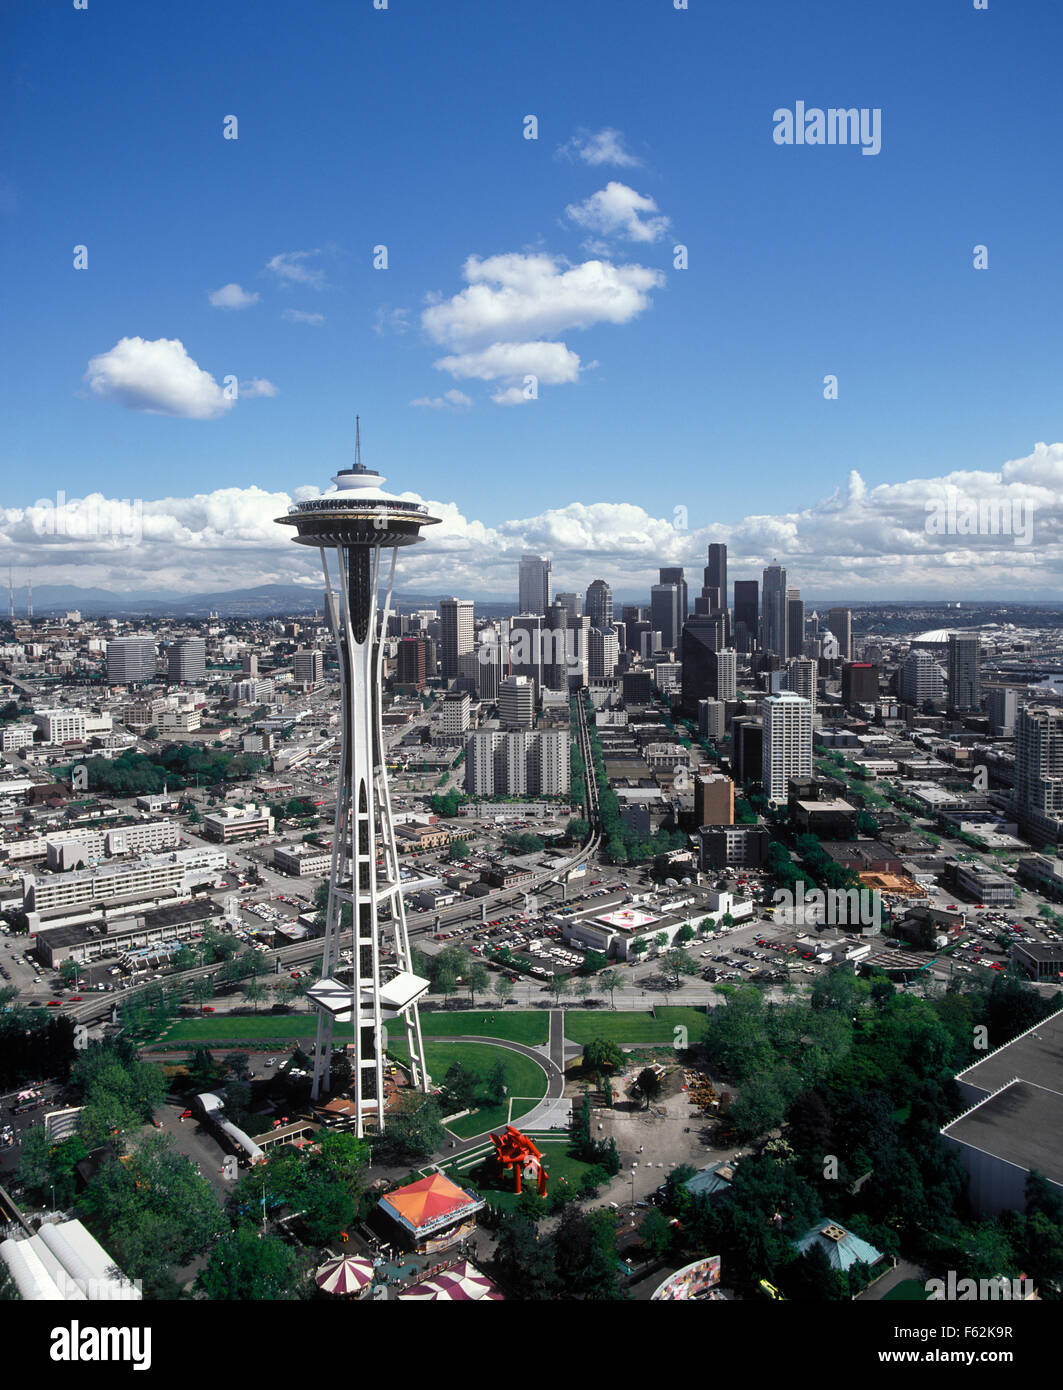 Washington, Seattle, Aerial view of city and Space Needle Stock Photo